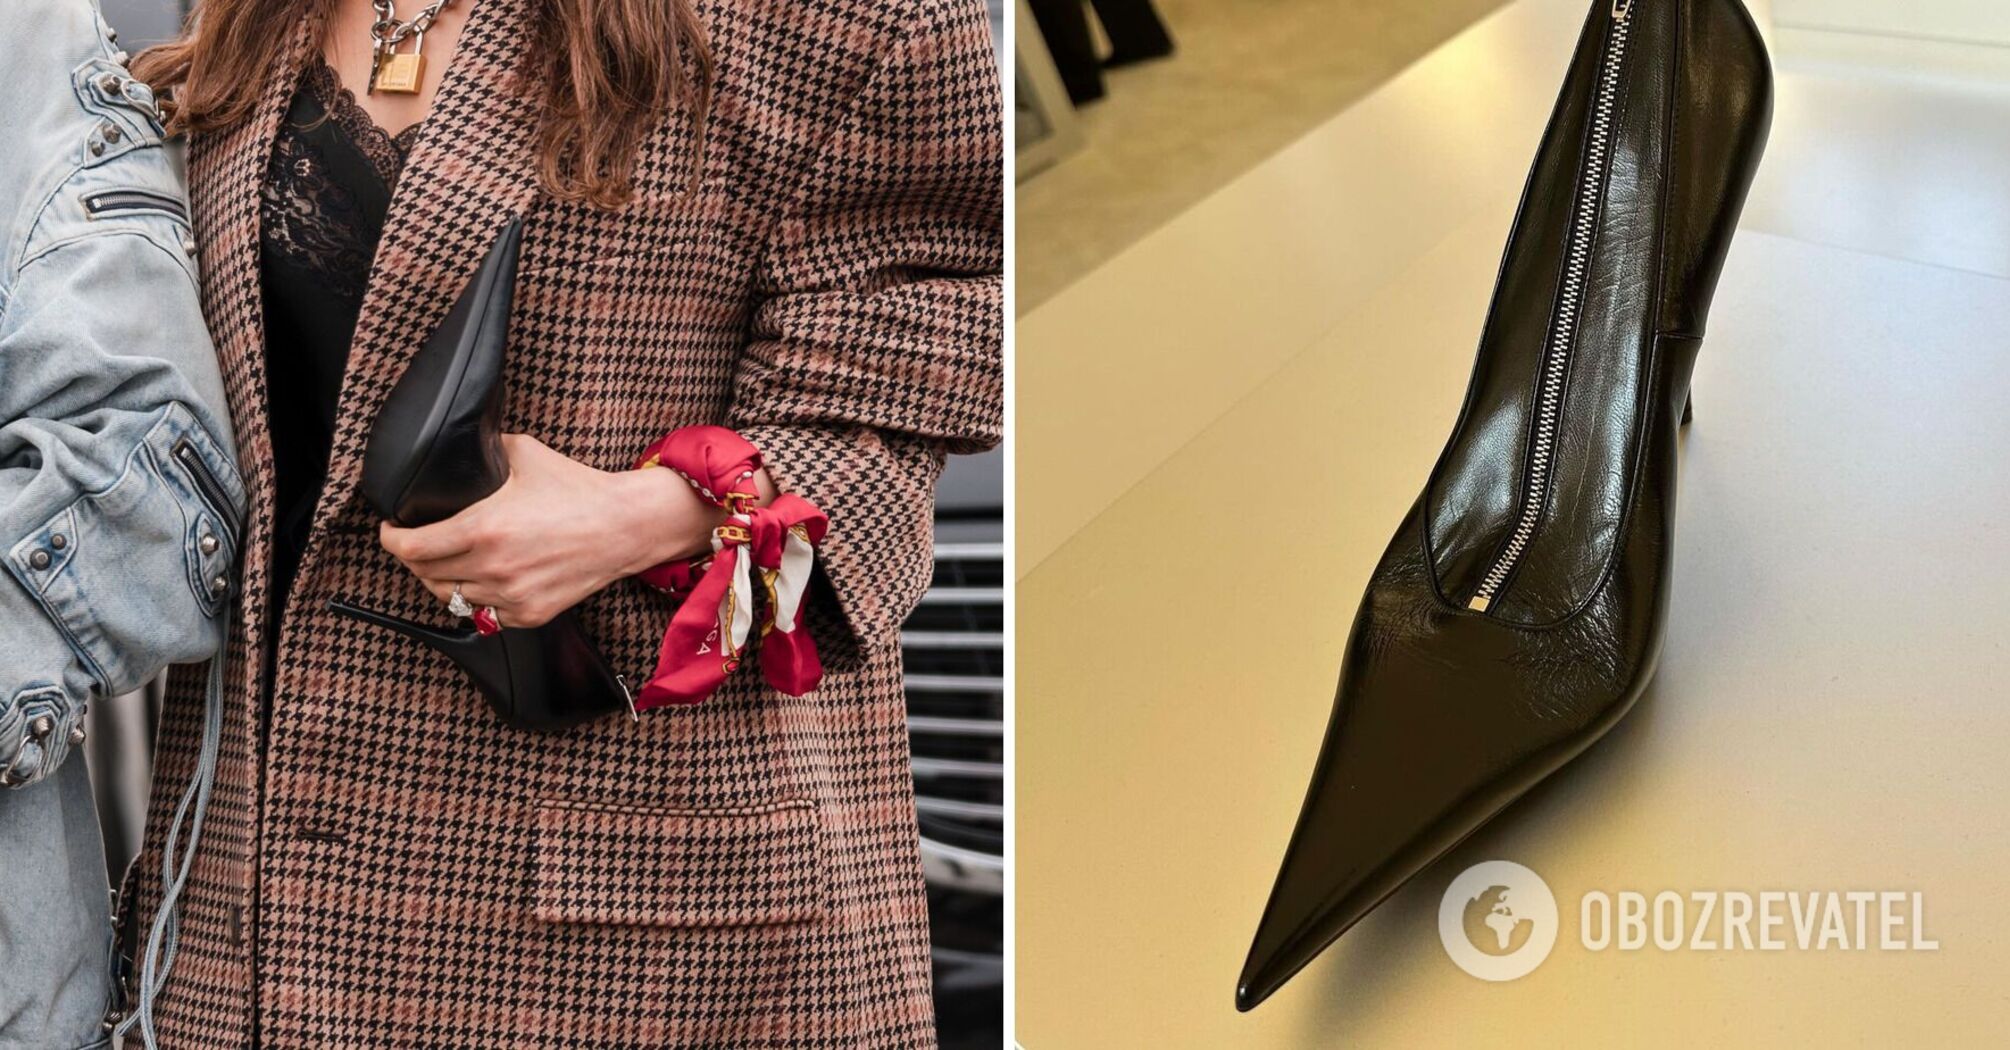 Balenciaga presented a clutch in the form of a shoe that can kill. Photo